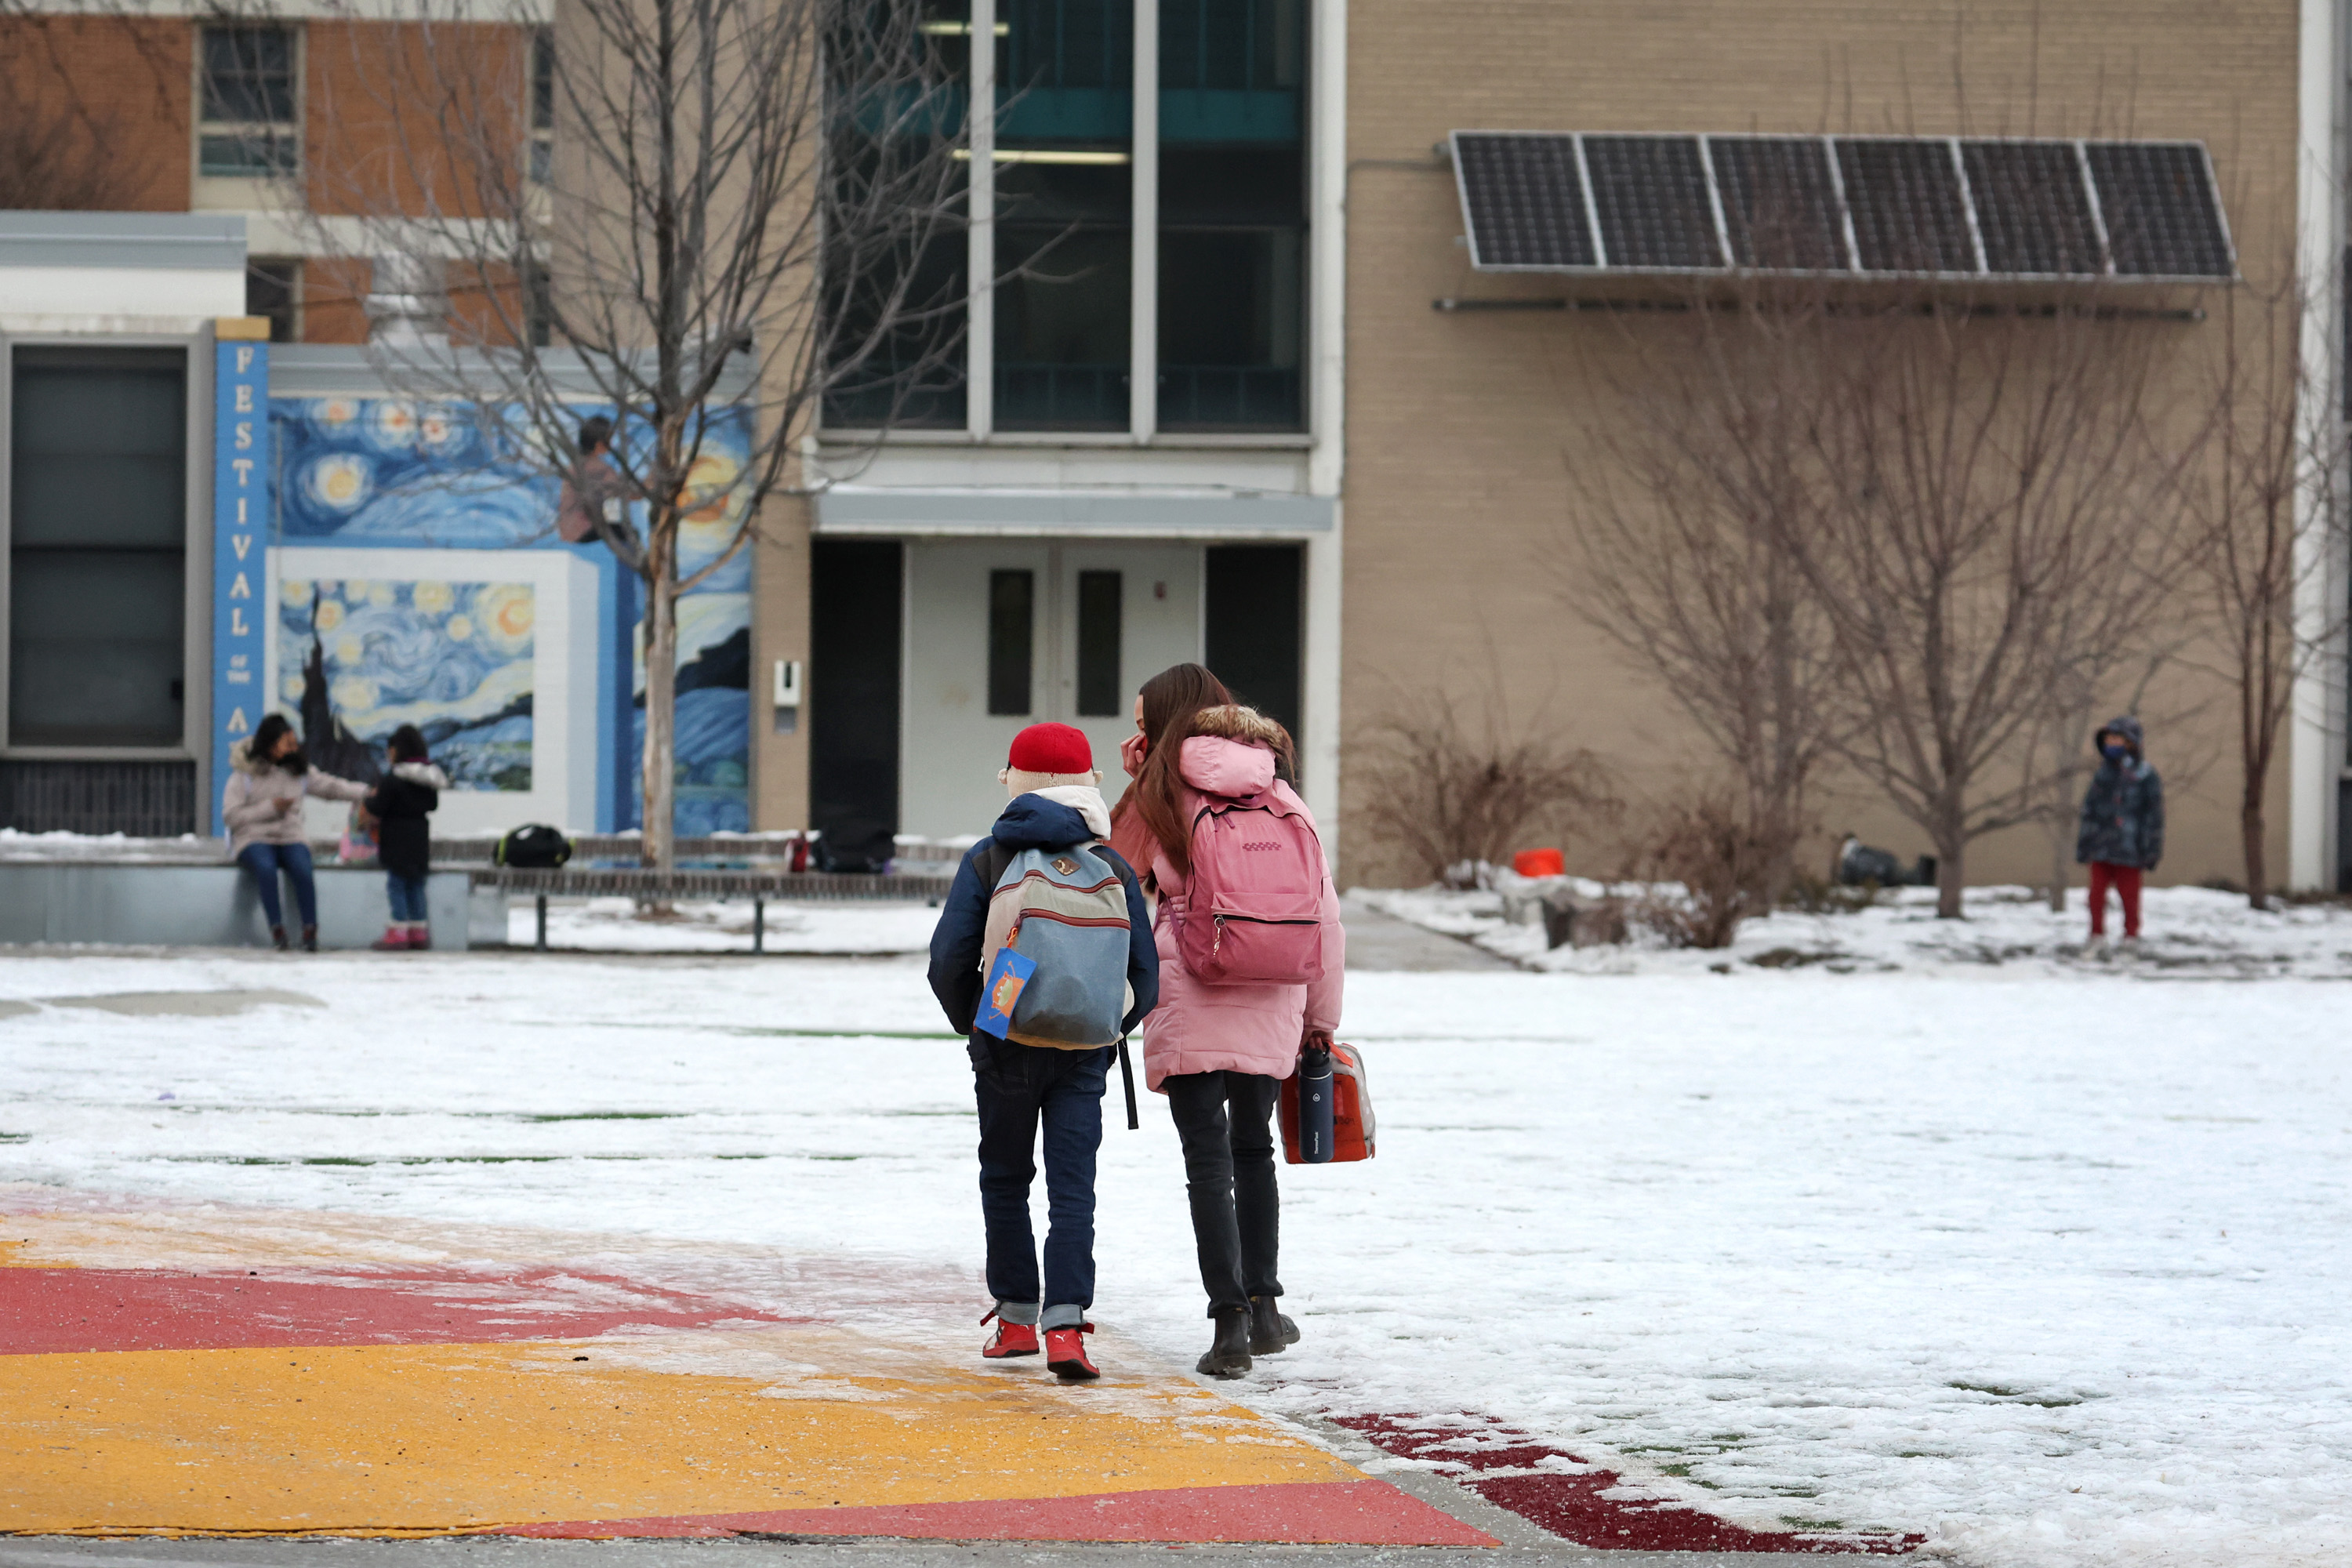 Two children, wearing backpacks, approach a school building in the snow.